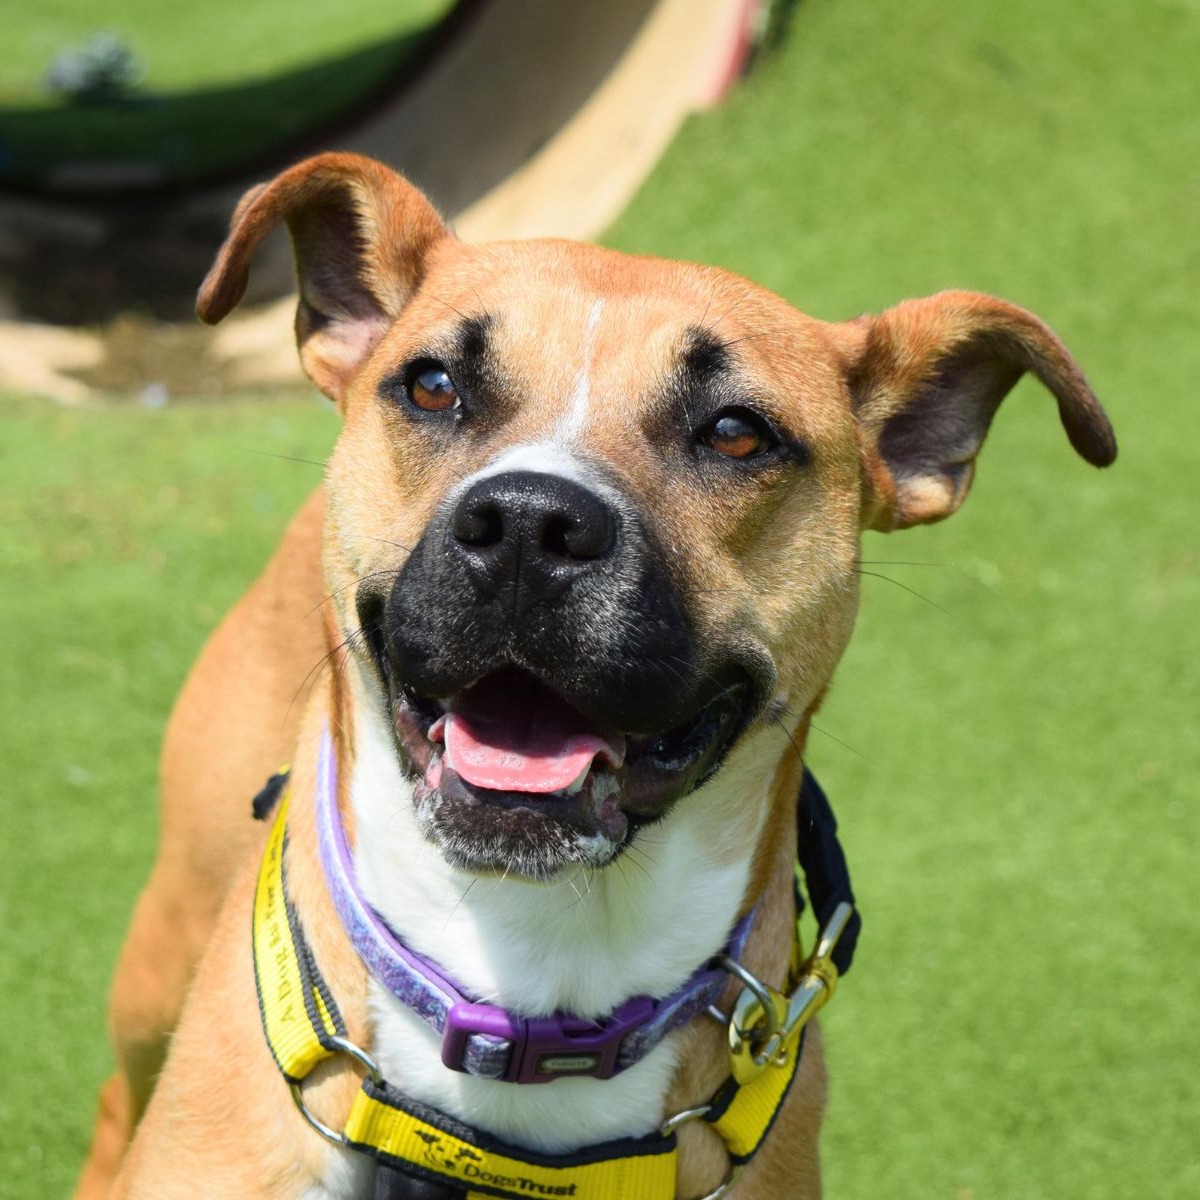 Jolene wanted to spread the Friday joy 😀😀

Who wouldn't smile seeing her wonderful smile?!

#StaffordshireBullTerrier #SBT #Adoption #rehoming #rescue #ADogIsForLife #DogsTrustWestLondon